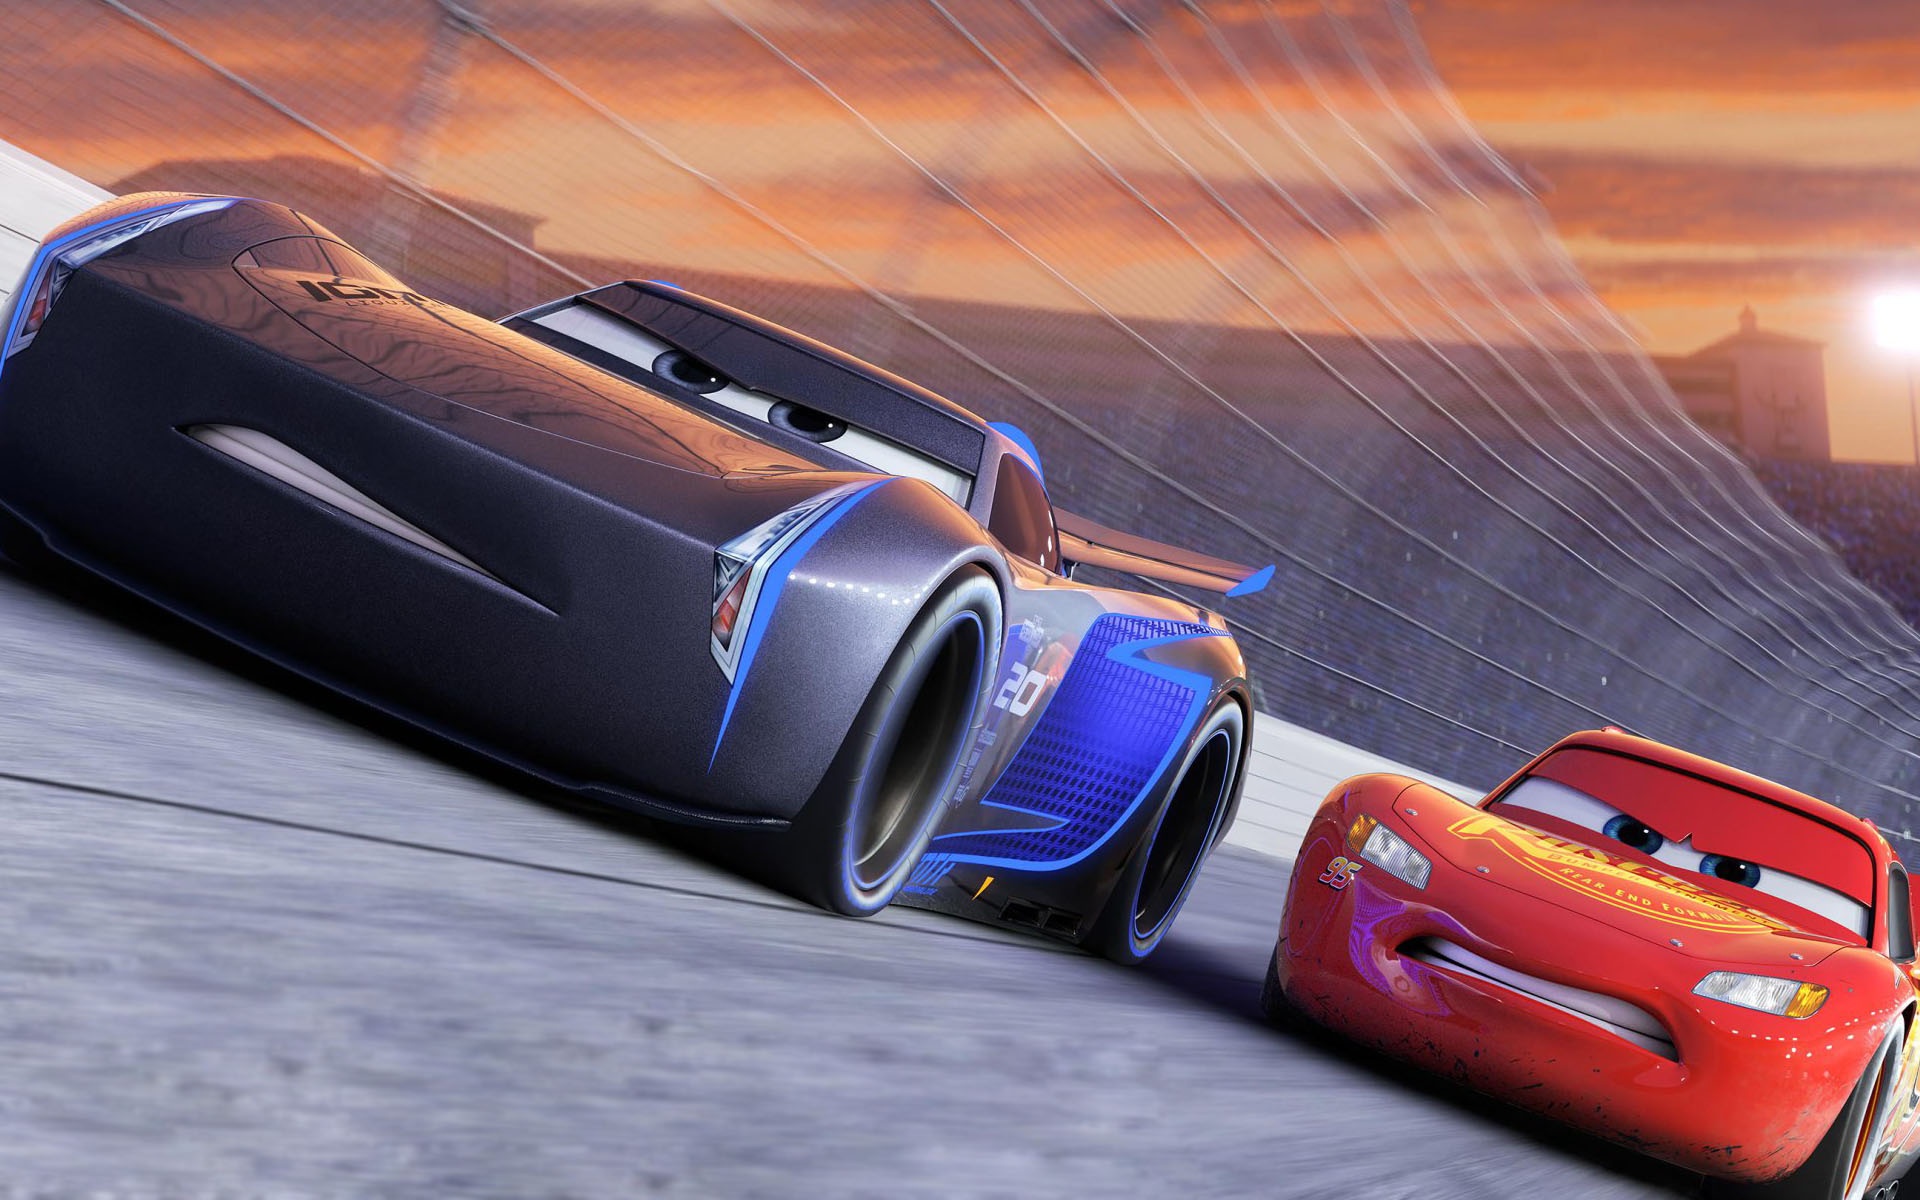 Movie Cars 3 HD Wallpaper | Background Image